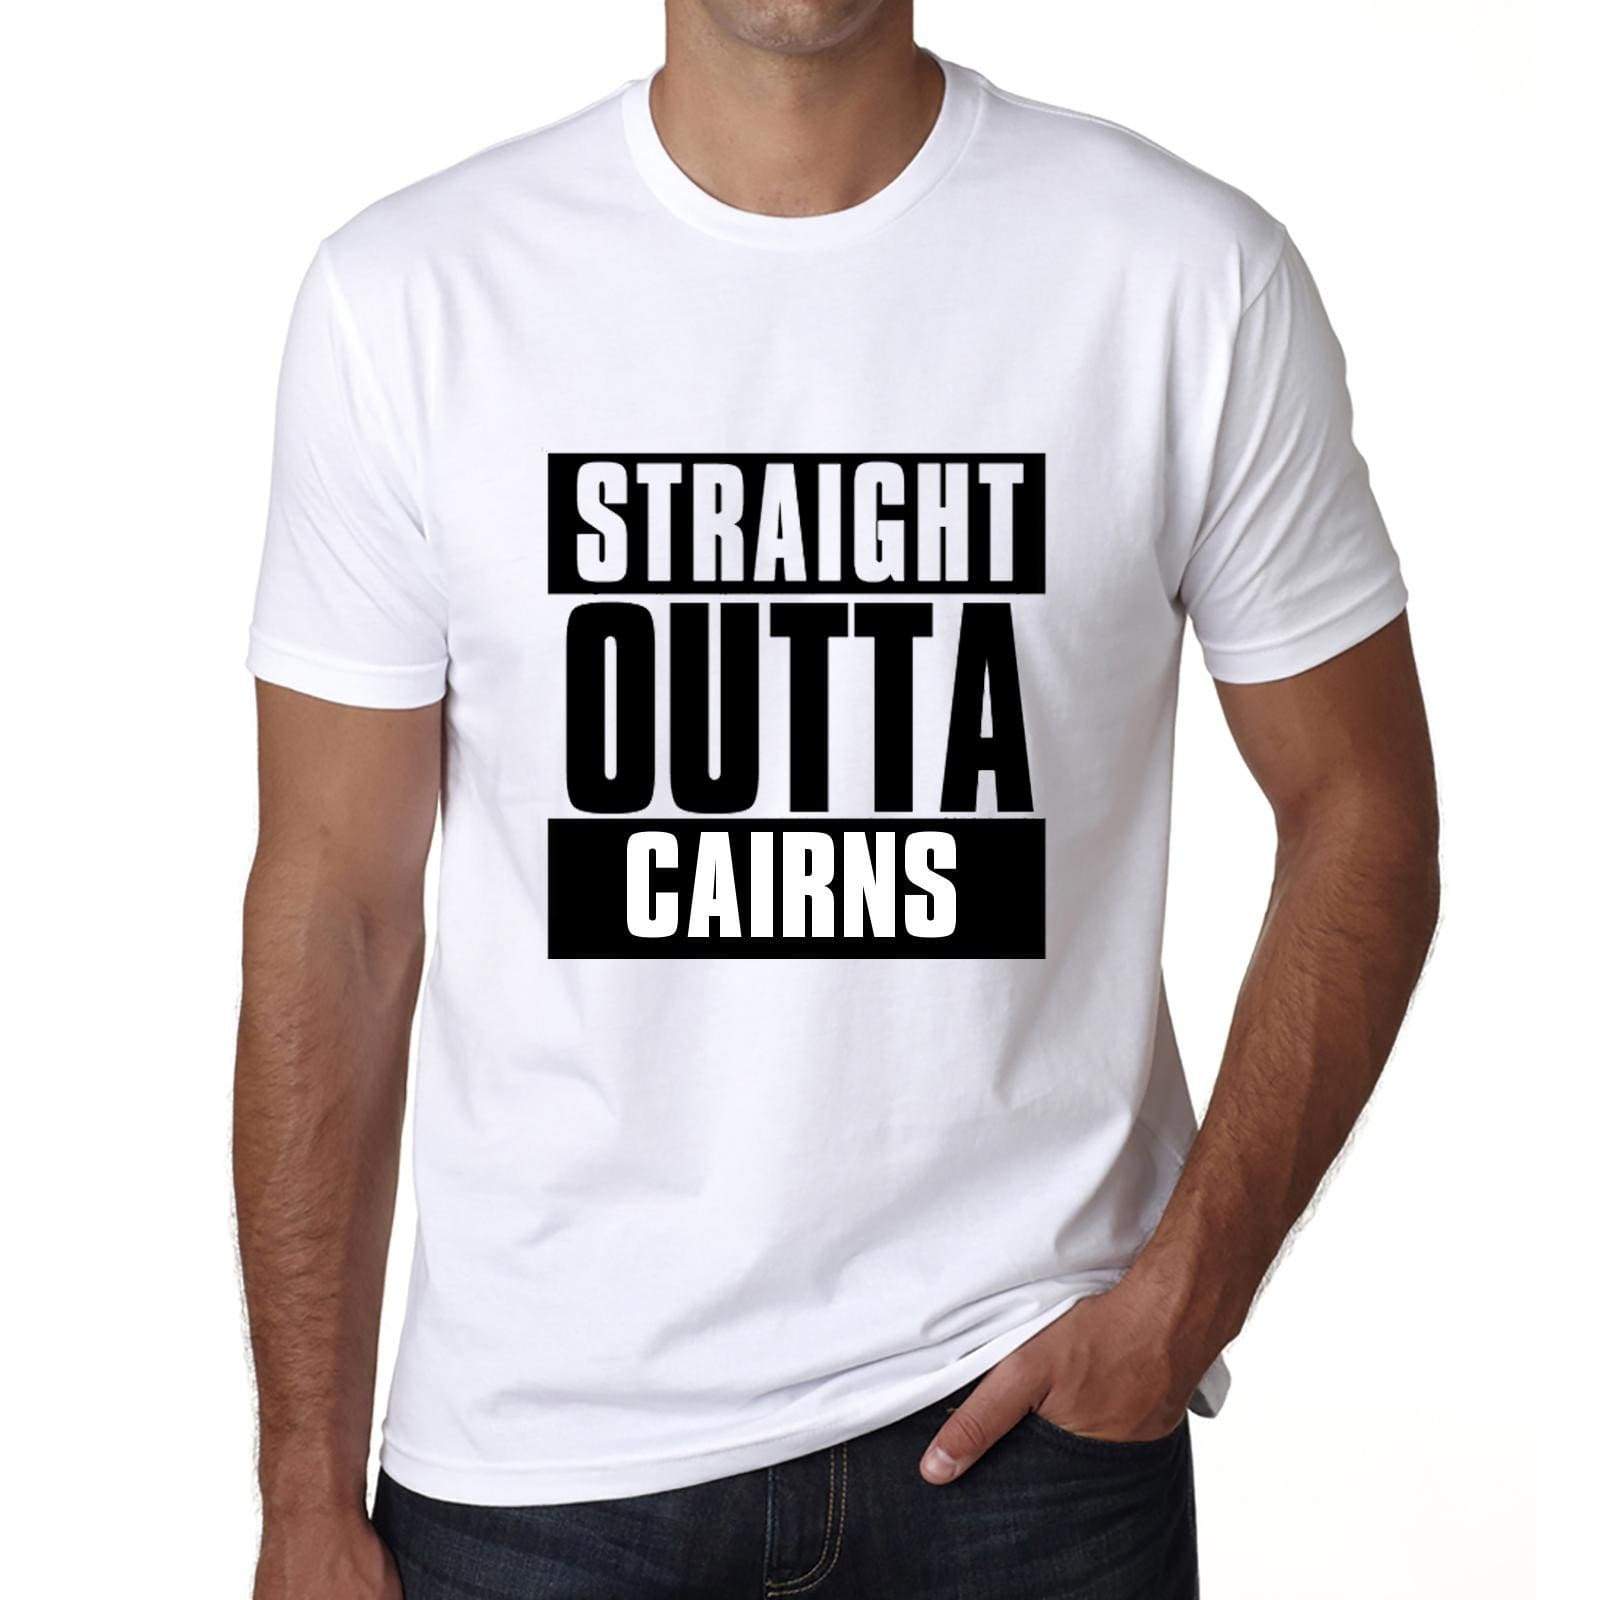 Straight Outta Cairns Mens Short Sleeve Round Neck T-Shirt 00027 - White / S - Casual